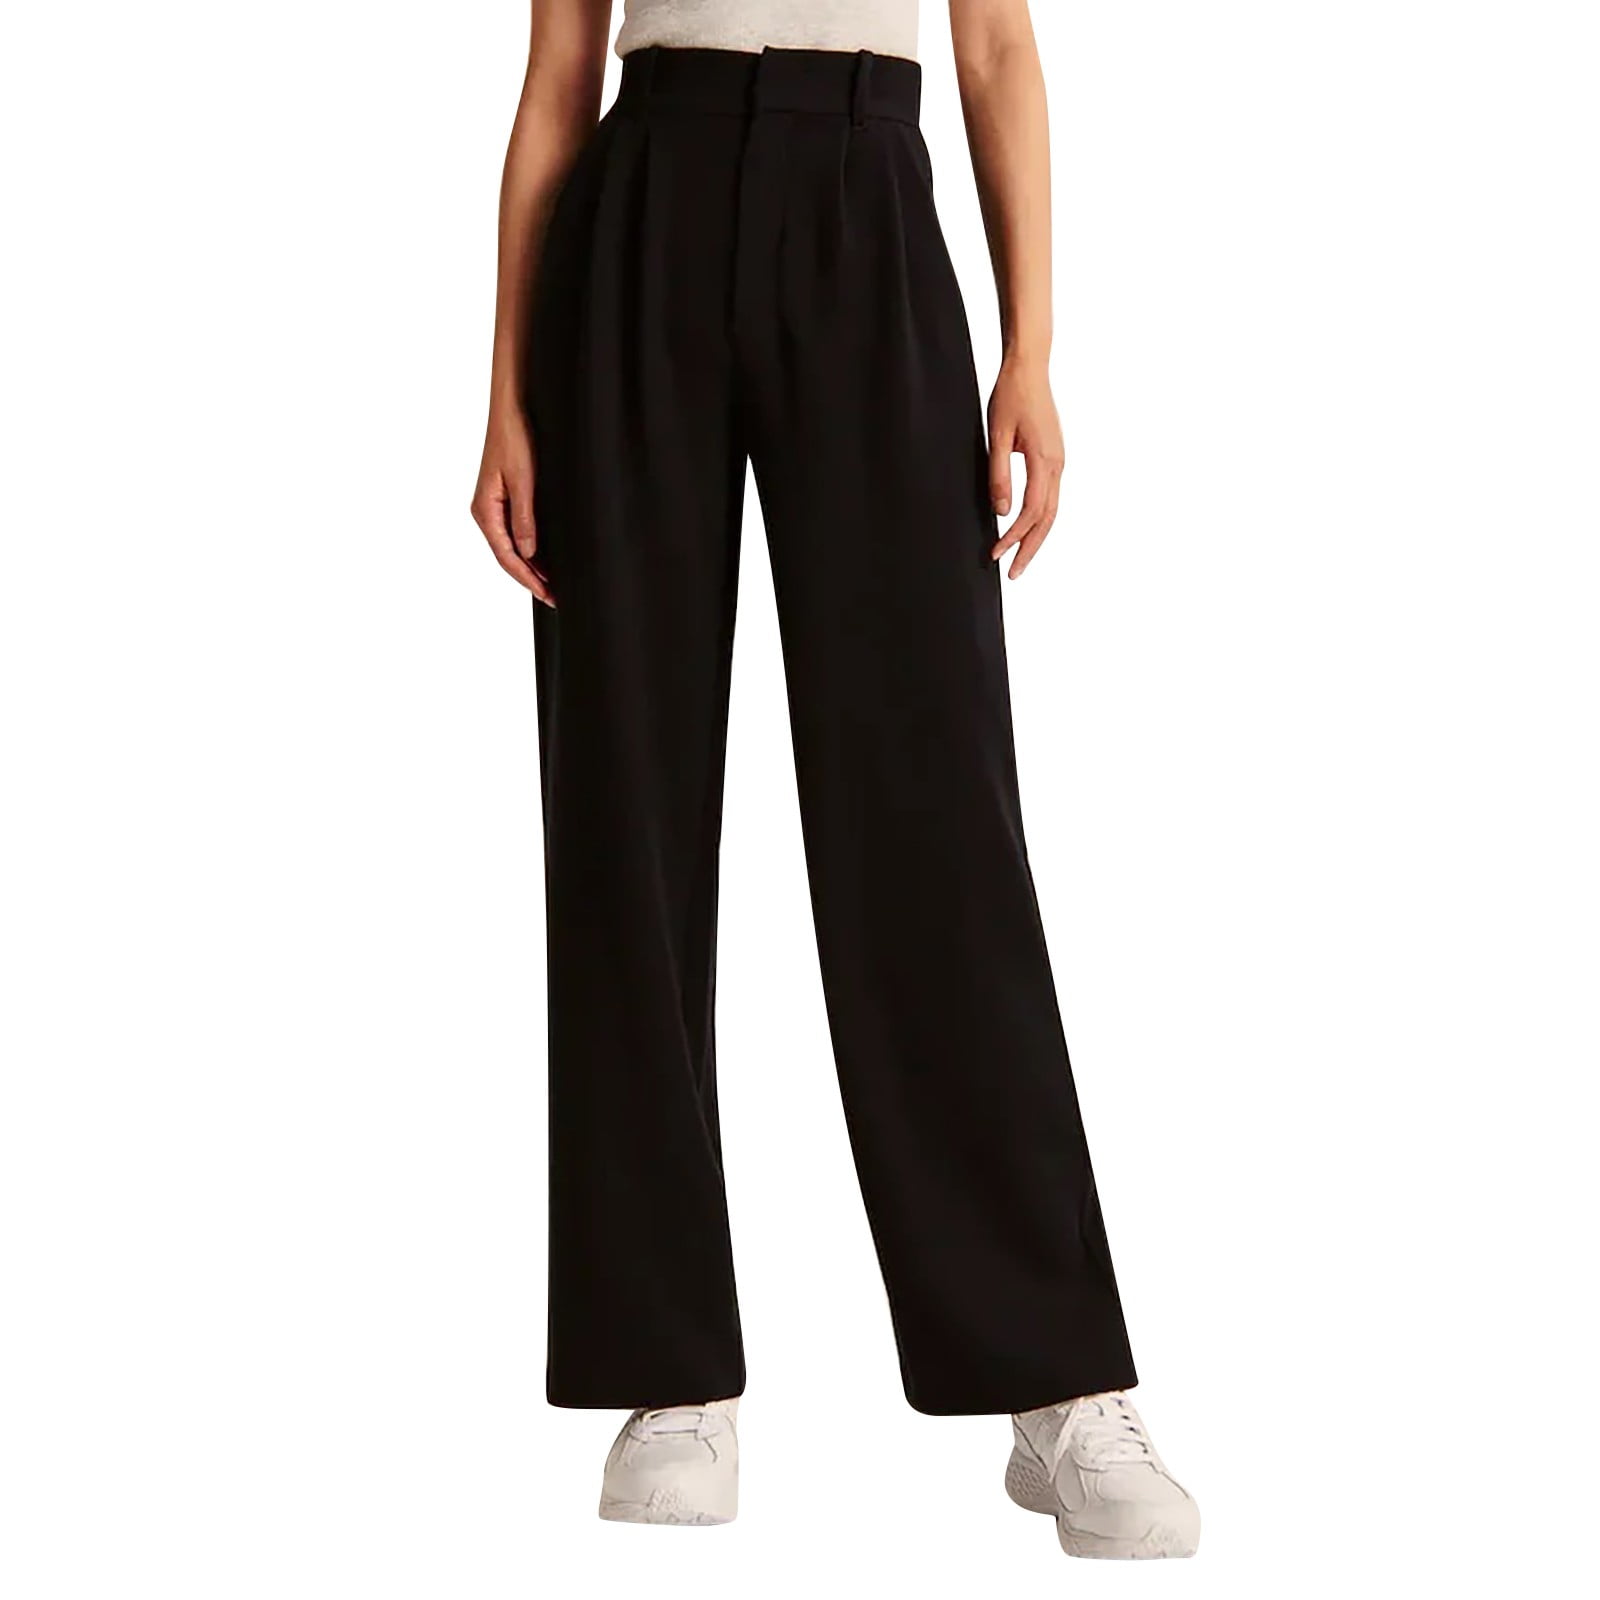 Style 2701W - Ladies Flex Fit Waist Dress Pant with Tailored Front